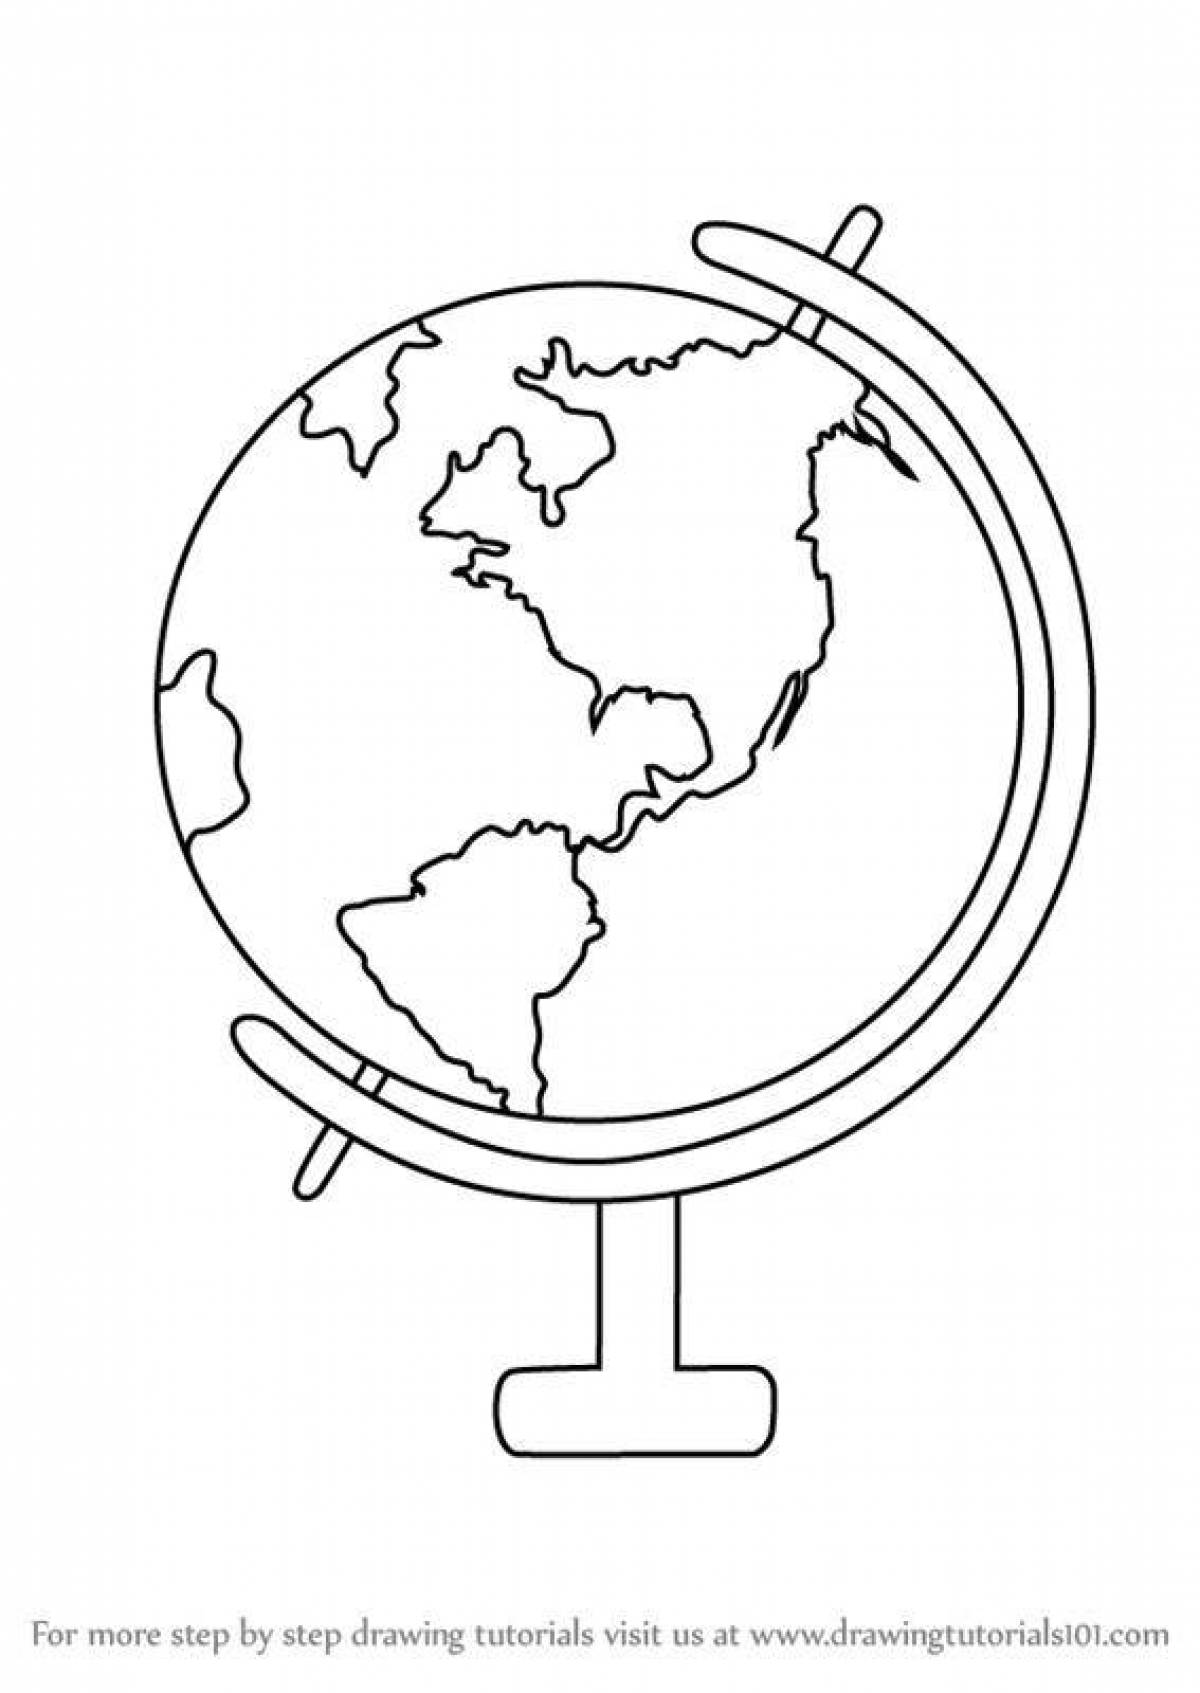 Fancy globe coloring page